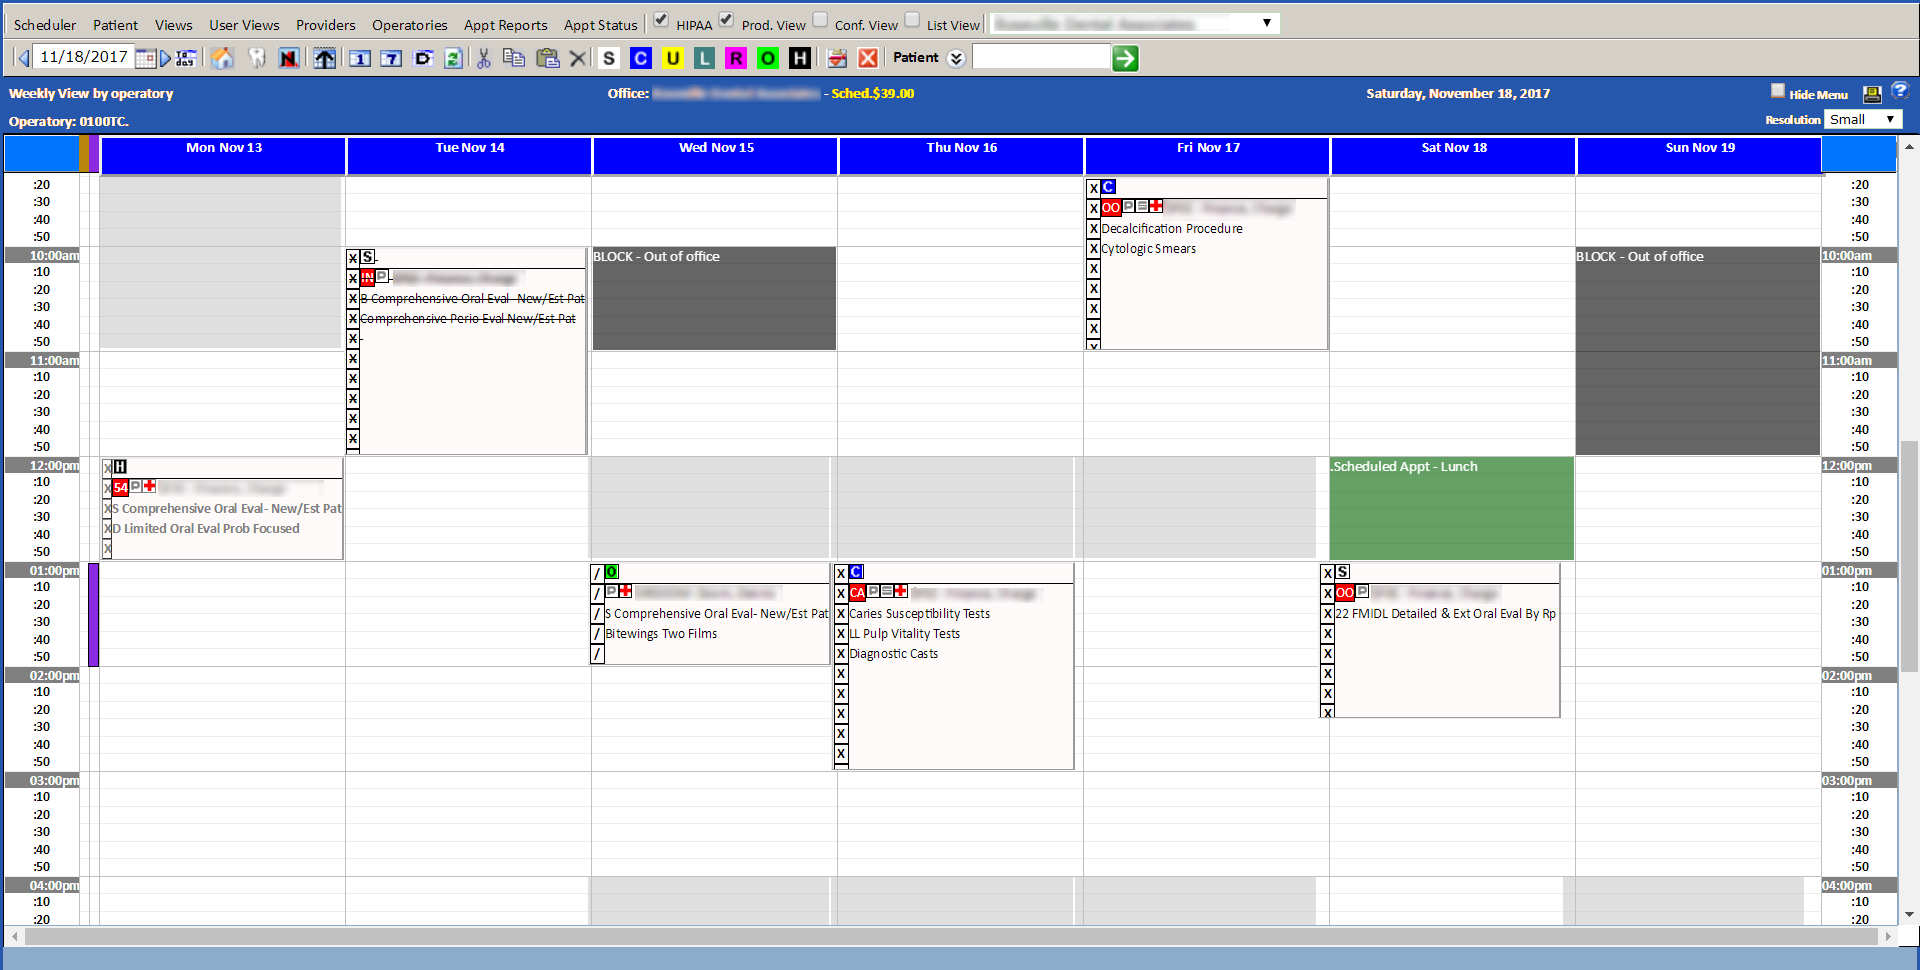 Weekly View of the Scheduler